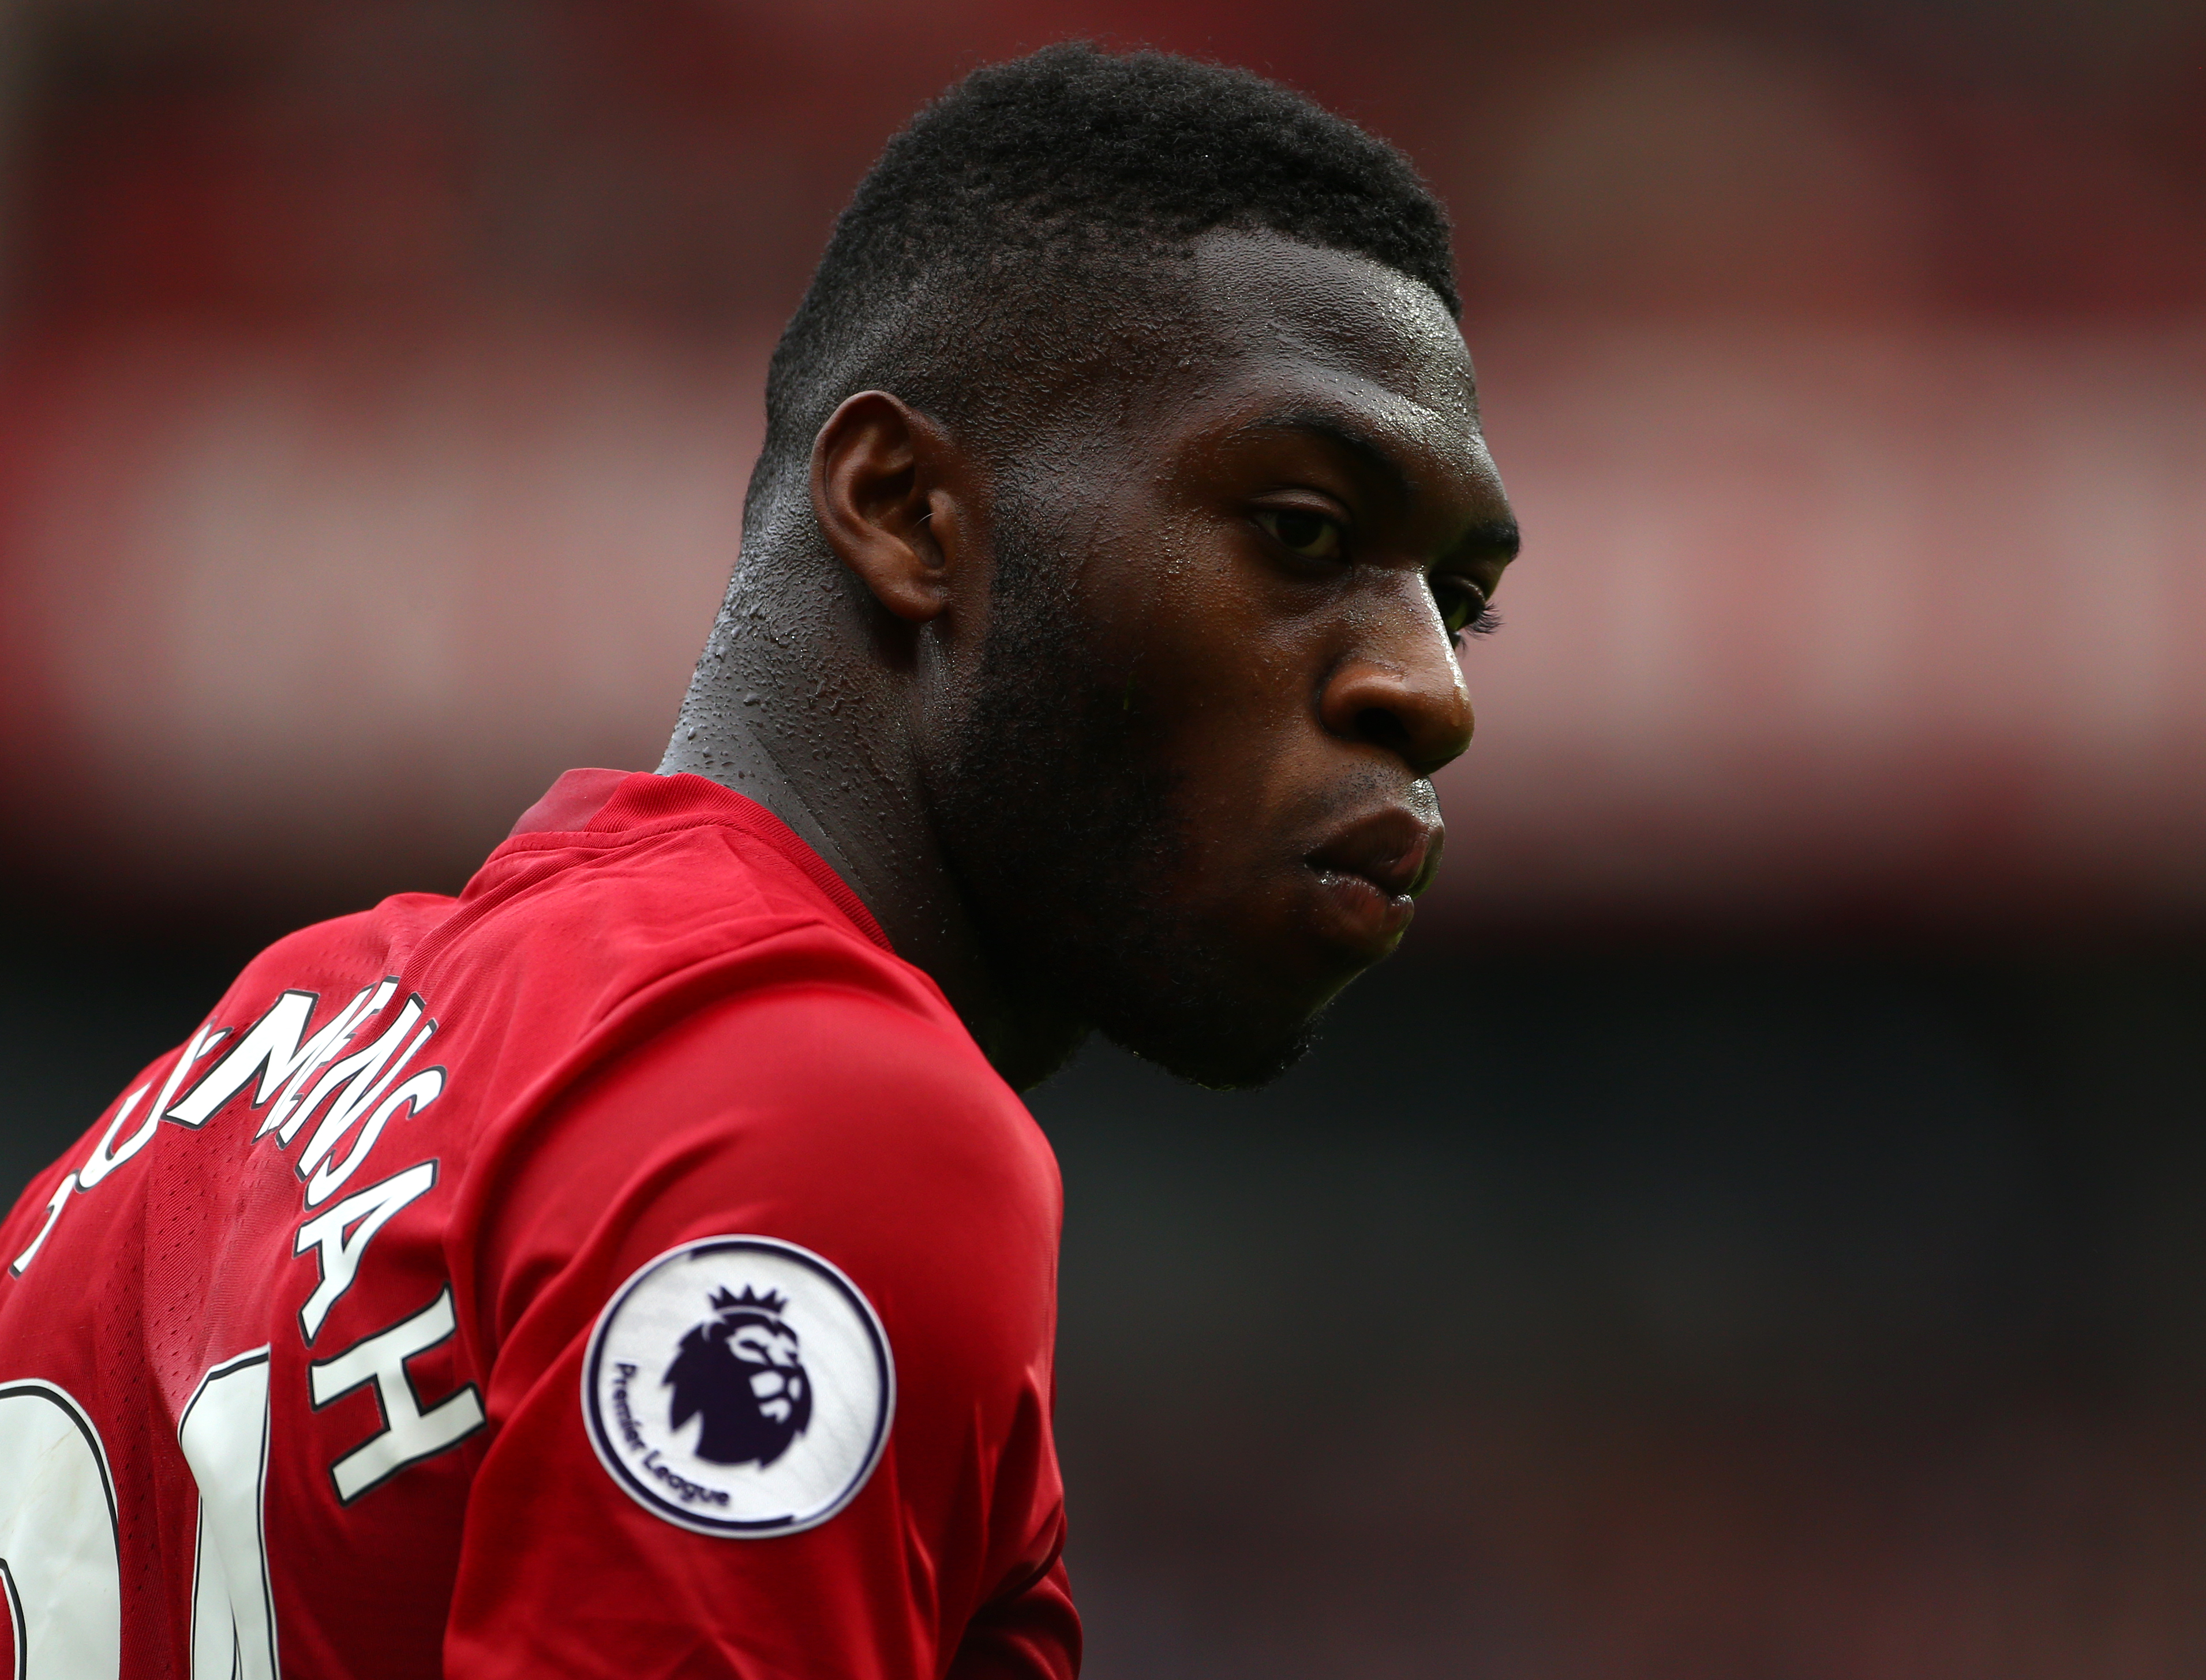 MANCHESTER, ENGLAND - MAY 21: Timothy Fosu-Mensah of Manchester United during the Premier League match between Manchester United and Crystal Palace at Old Trafford on May 21, 2017 in Manchester, England. (Photo by Dave Thompson/Getty Images)